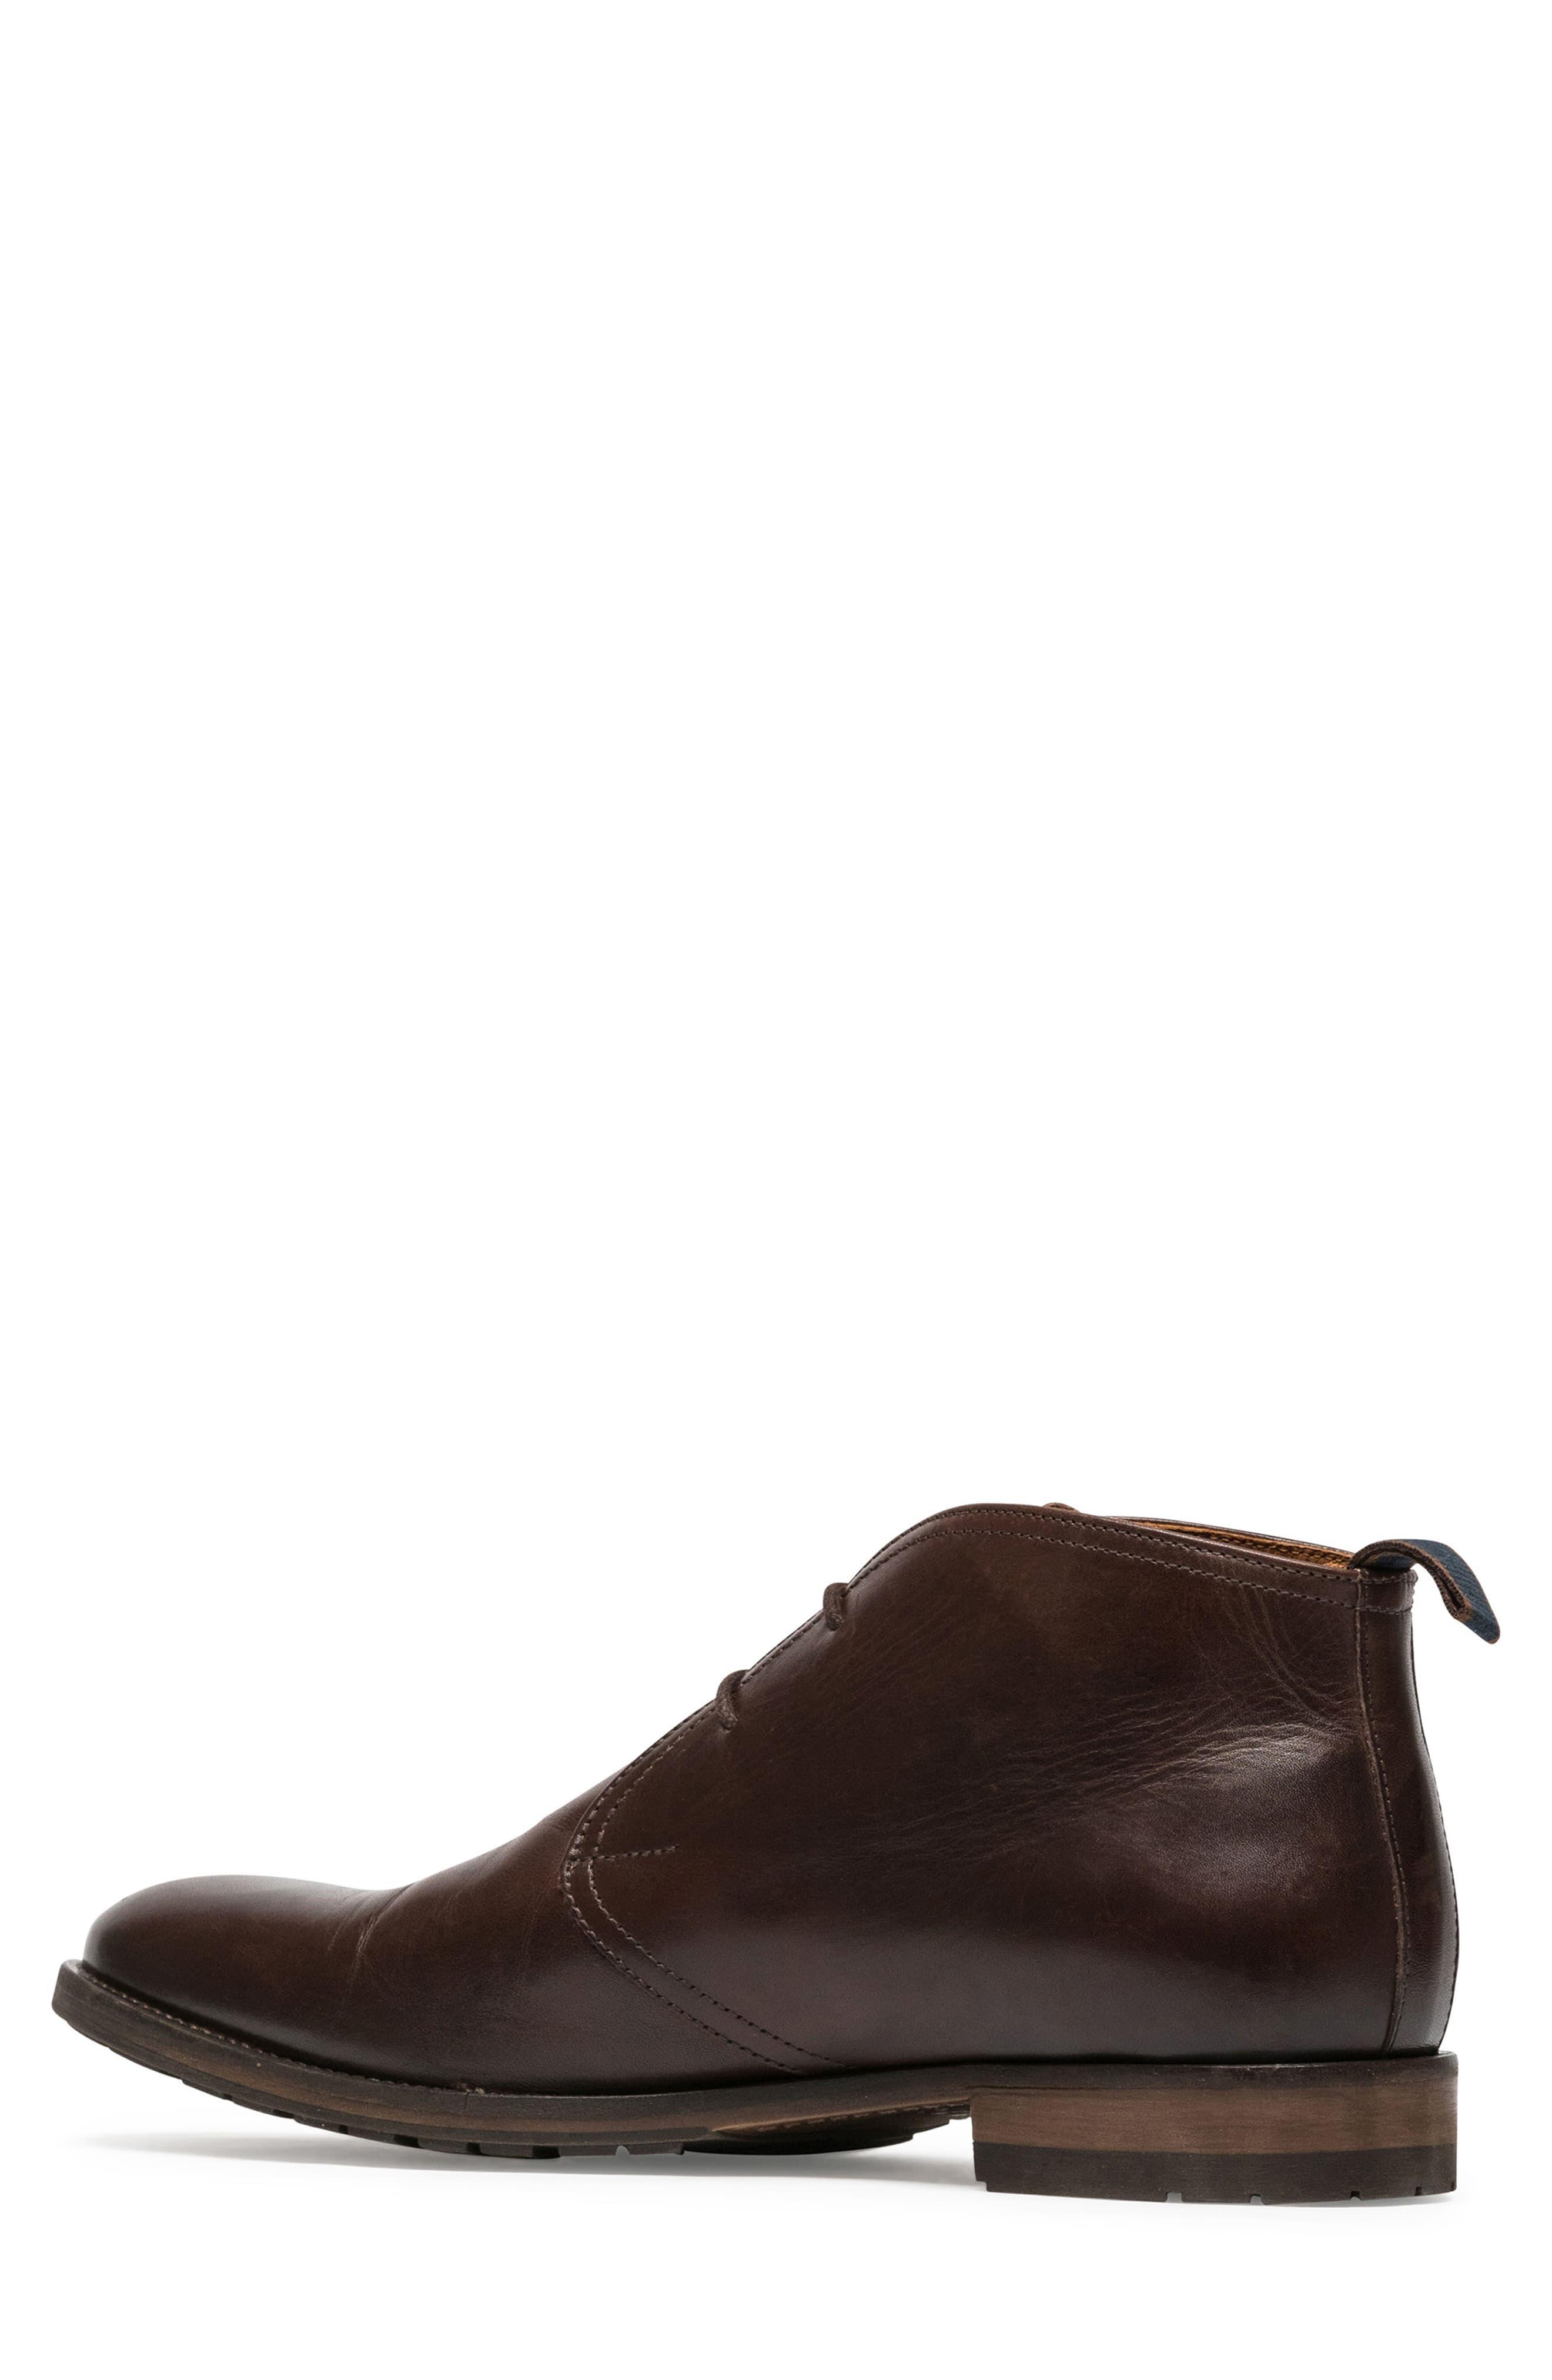 Rodd & Gunn Leather Pebbly Hill Chukka Boot in Chocolate (Brown) for ...